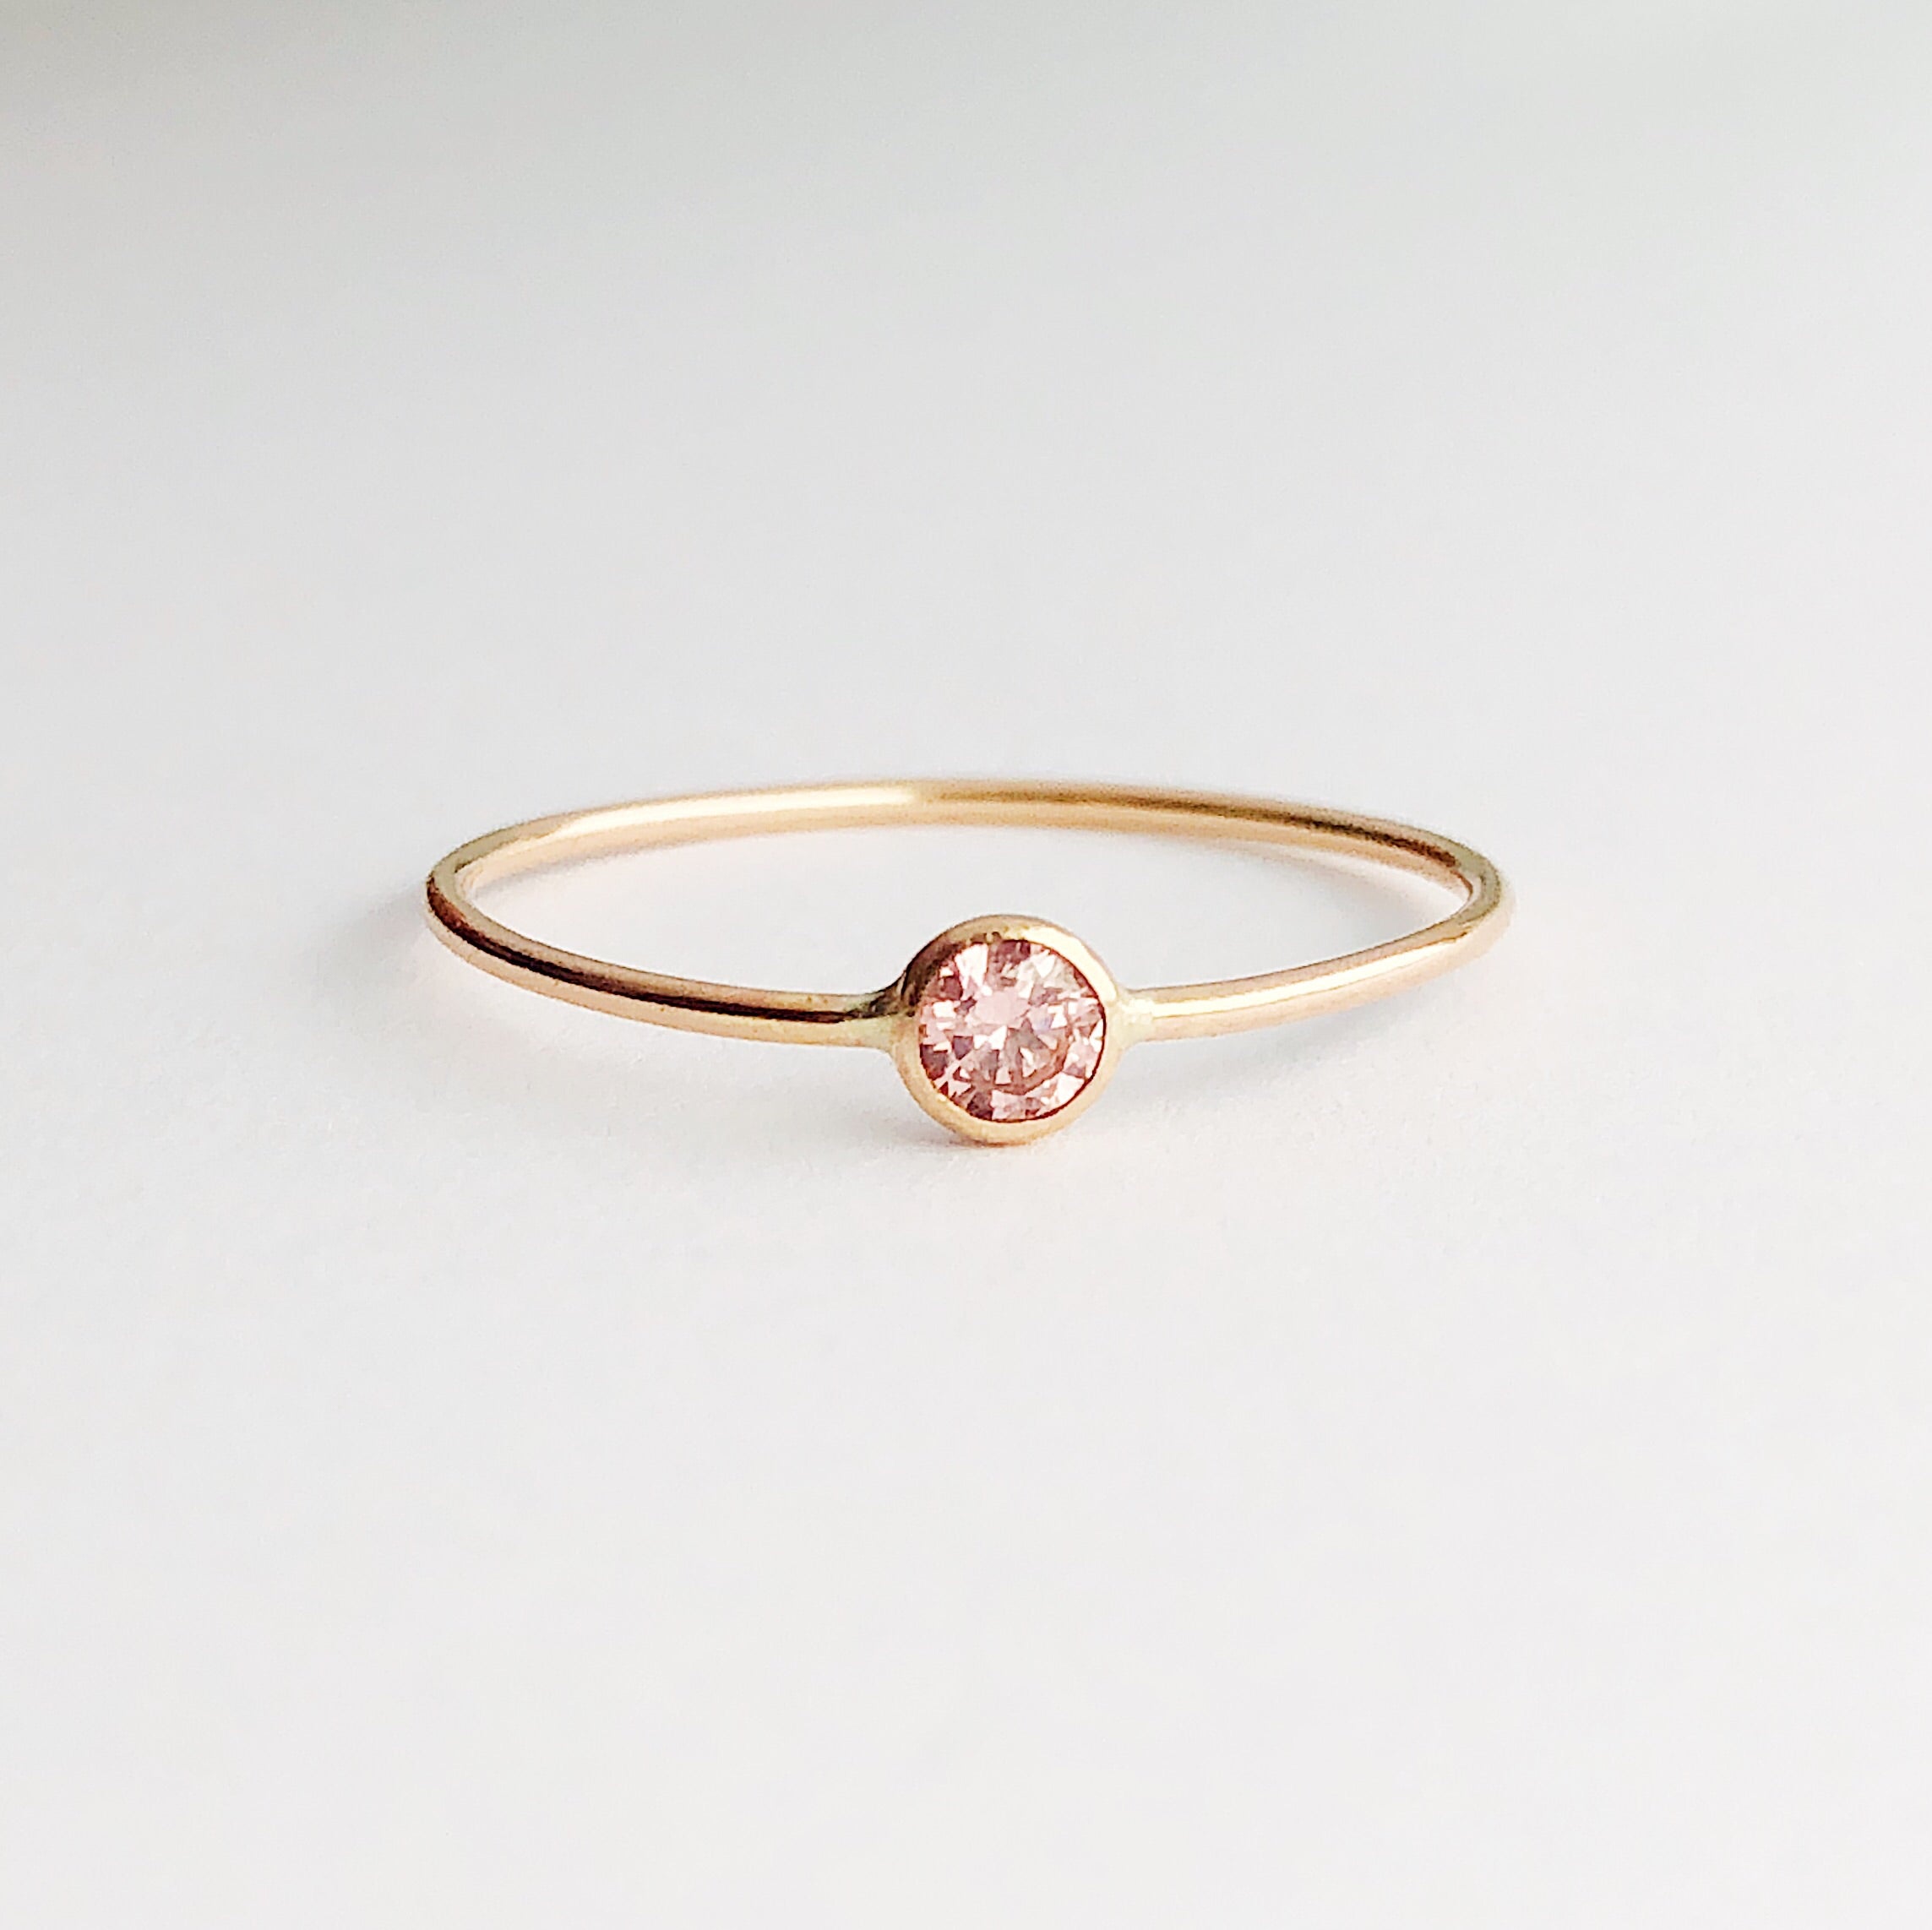 Stackable Morganite Solitaire Ring | 14kt Gold Filled 3mm Pink CZ Gemstone Promise Ring